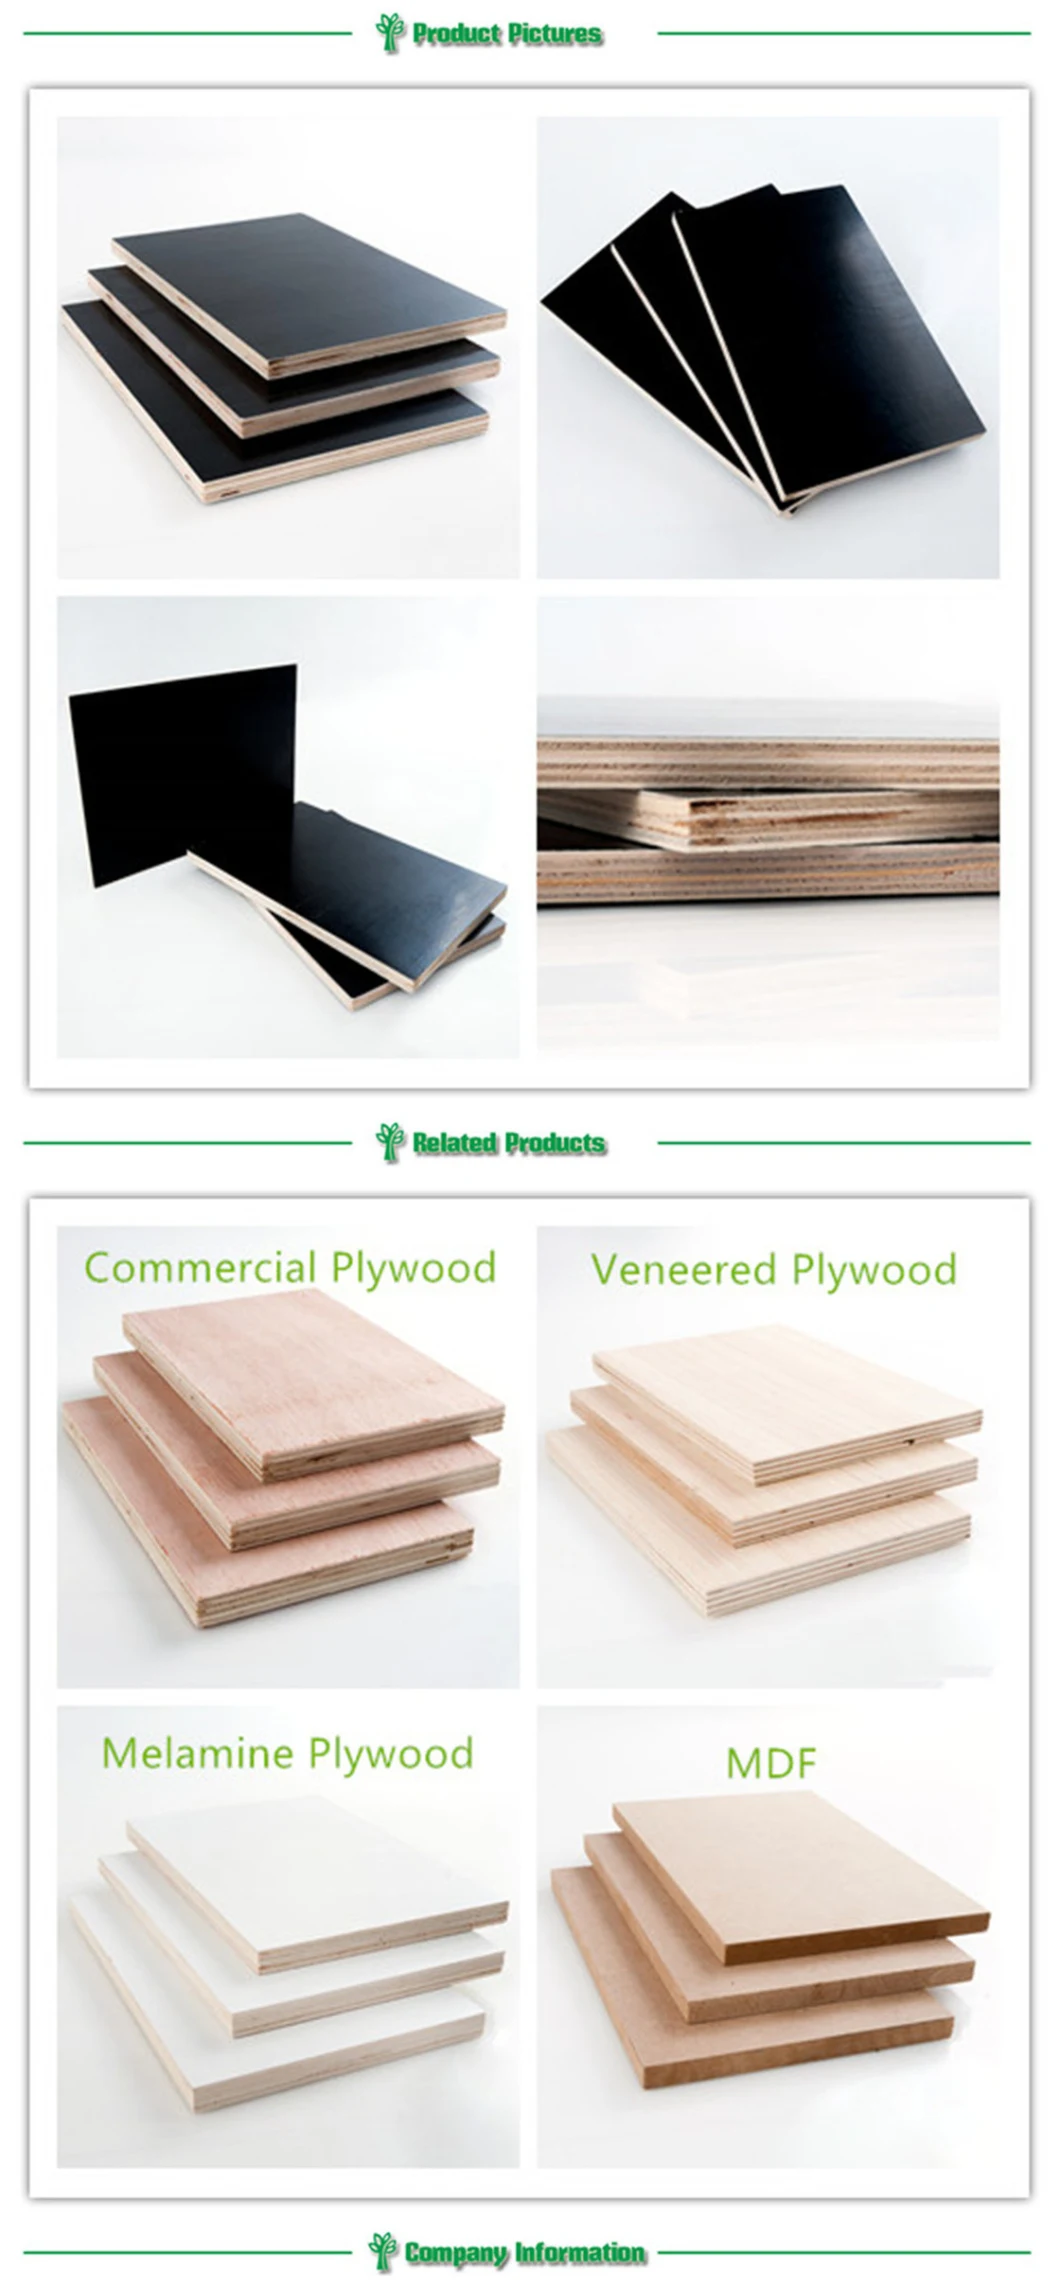 Film Faced Plywood for Construction Use, Building Construction Materials, Formwork Plywood